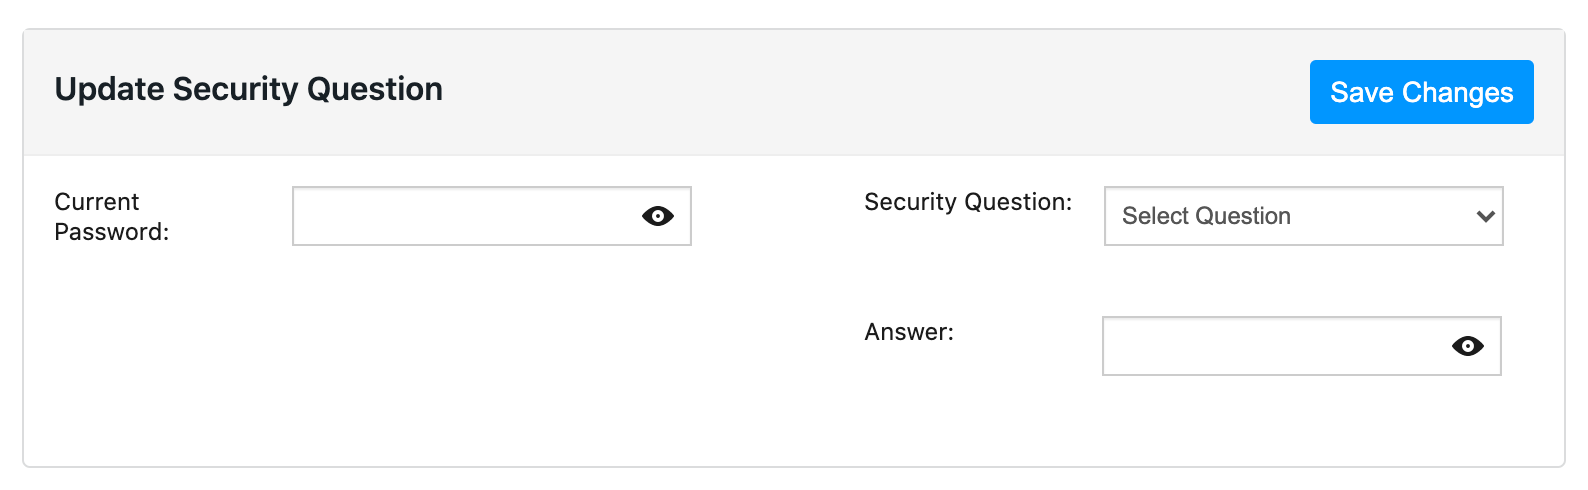 securityquestion.png